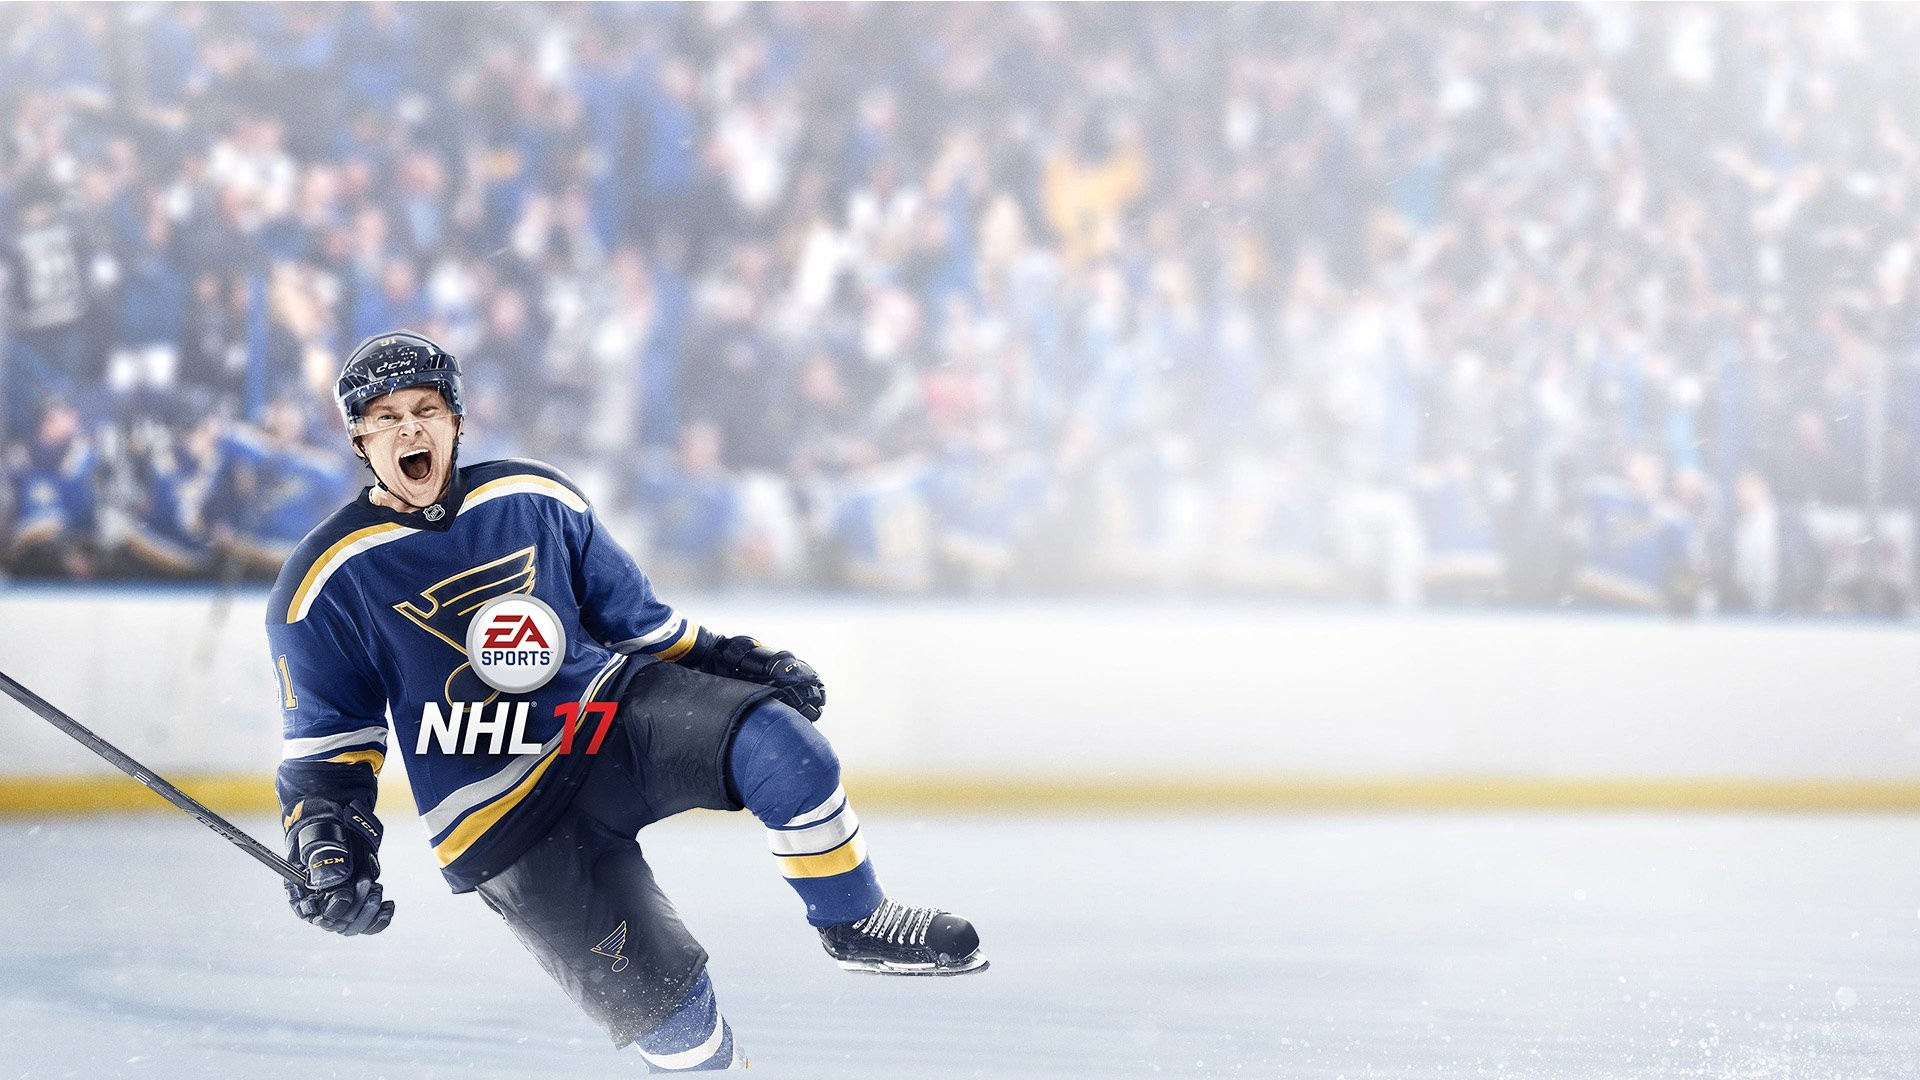 Download Nhl wallpapers for mobile phone free Nhl HD pictures